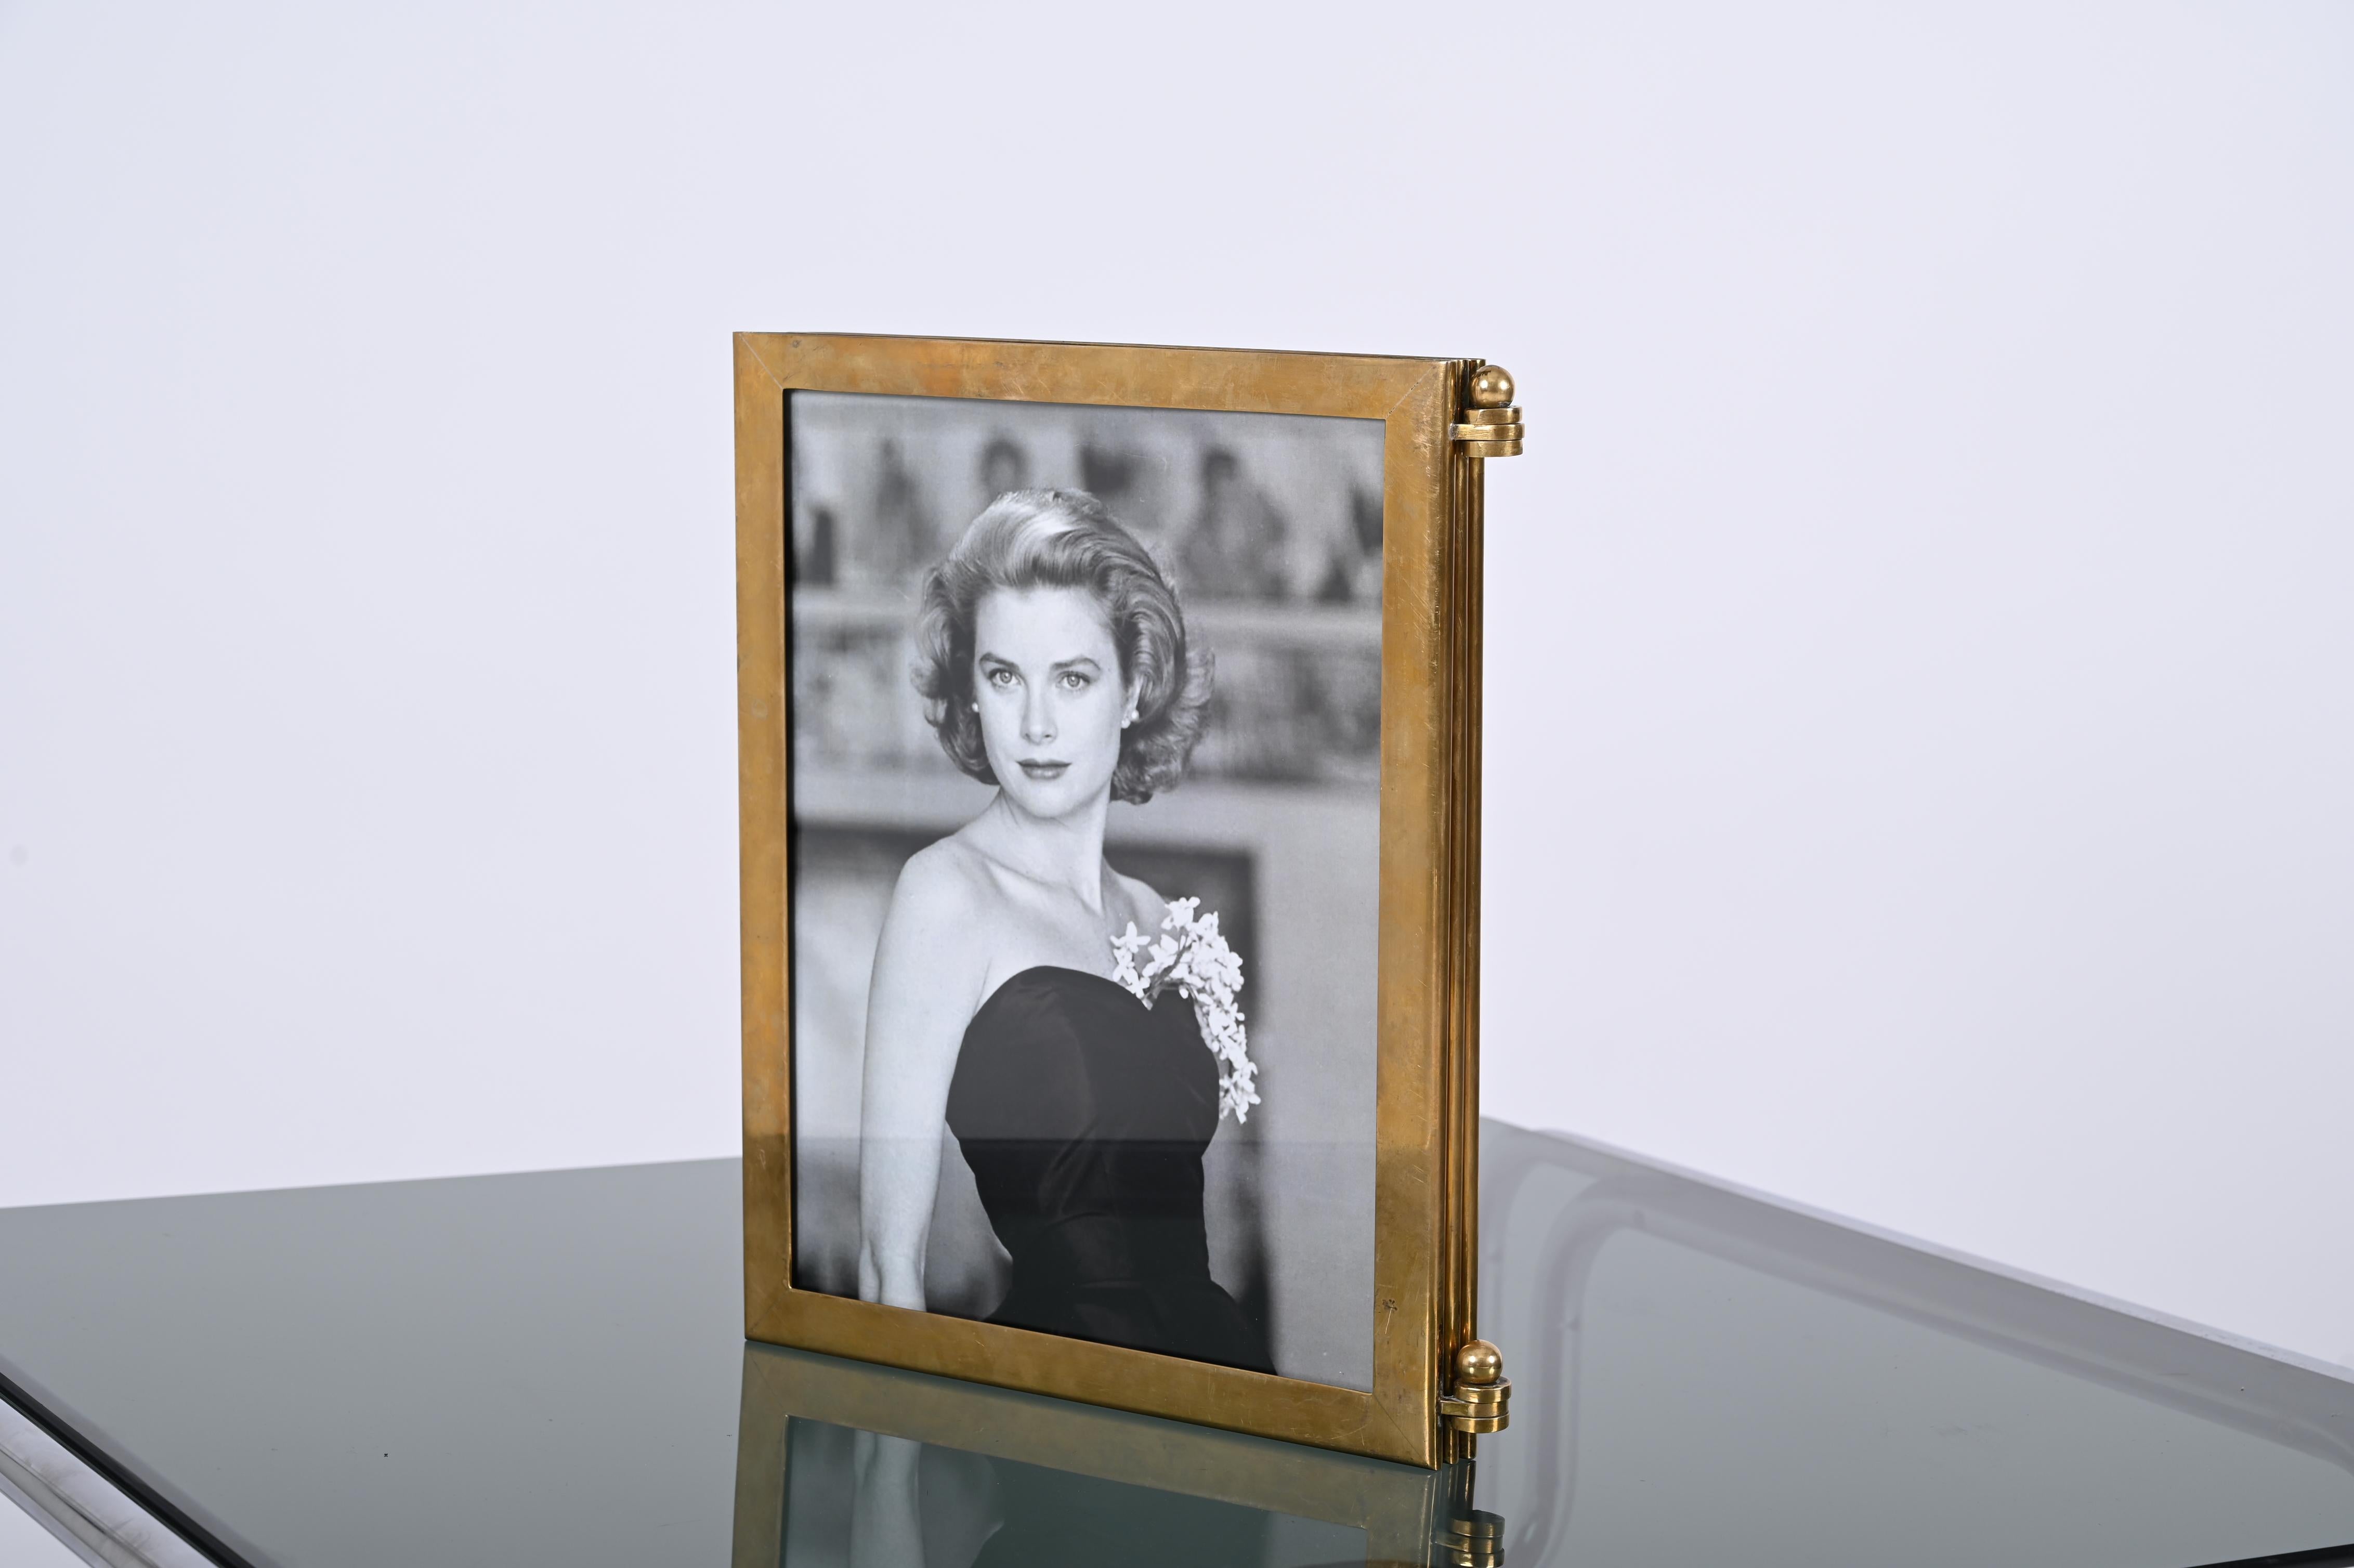 Metal Mid-Century Italian Photo Frame in Solid Brass, Hollywood Regency, 1950s For Sale